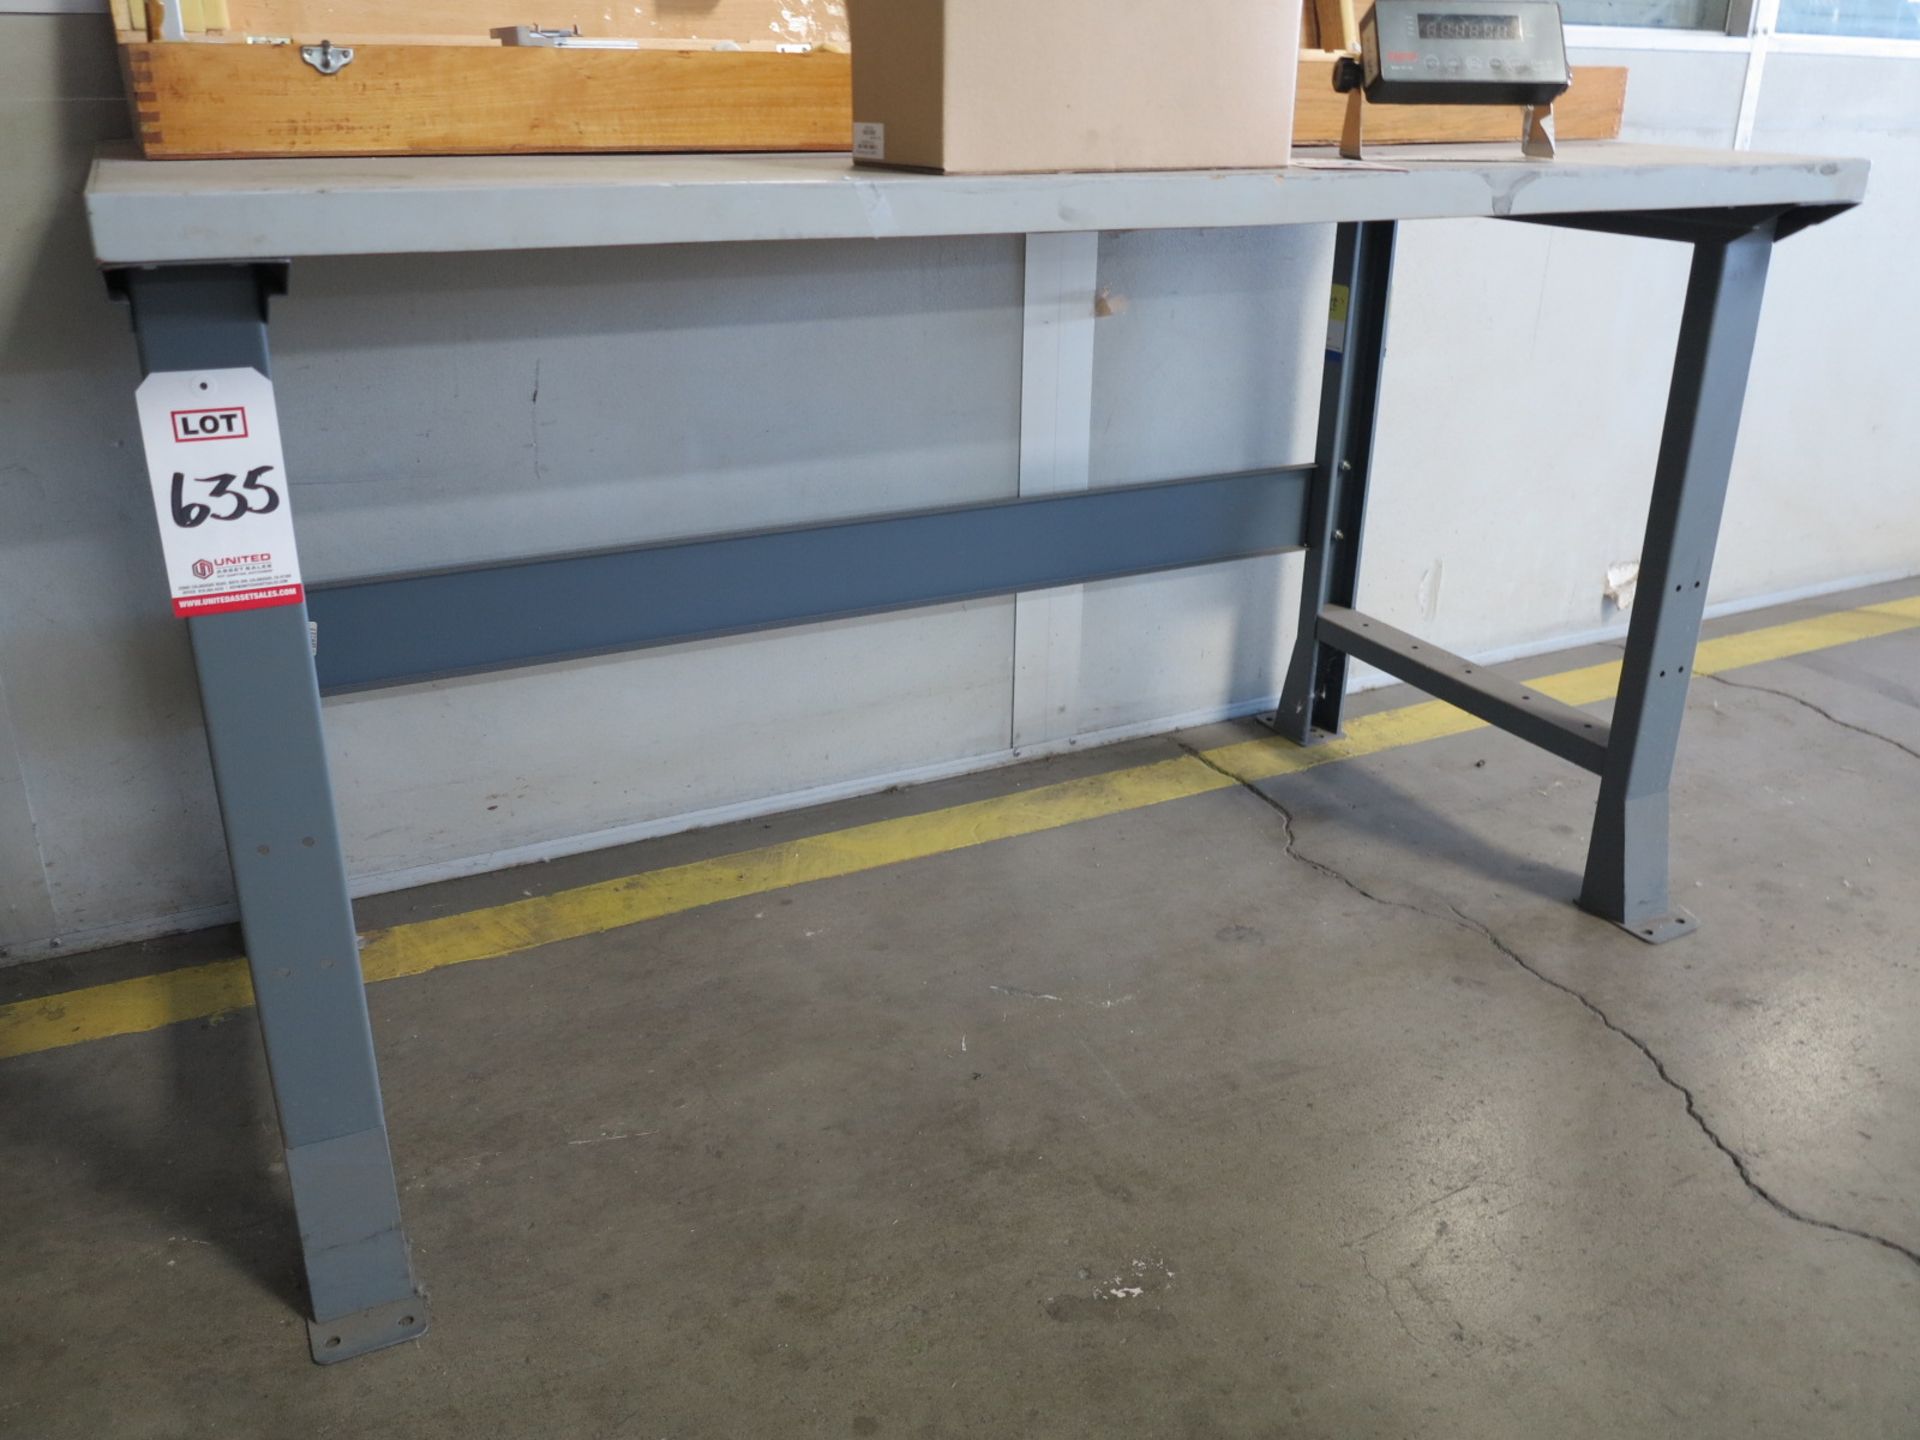 5' X 30" WORKBENCH, WOOD TOP, CONTENTS NOT INCLUDED